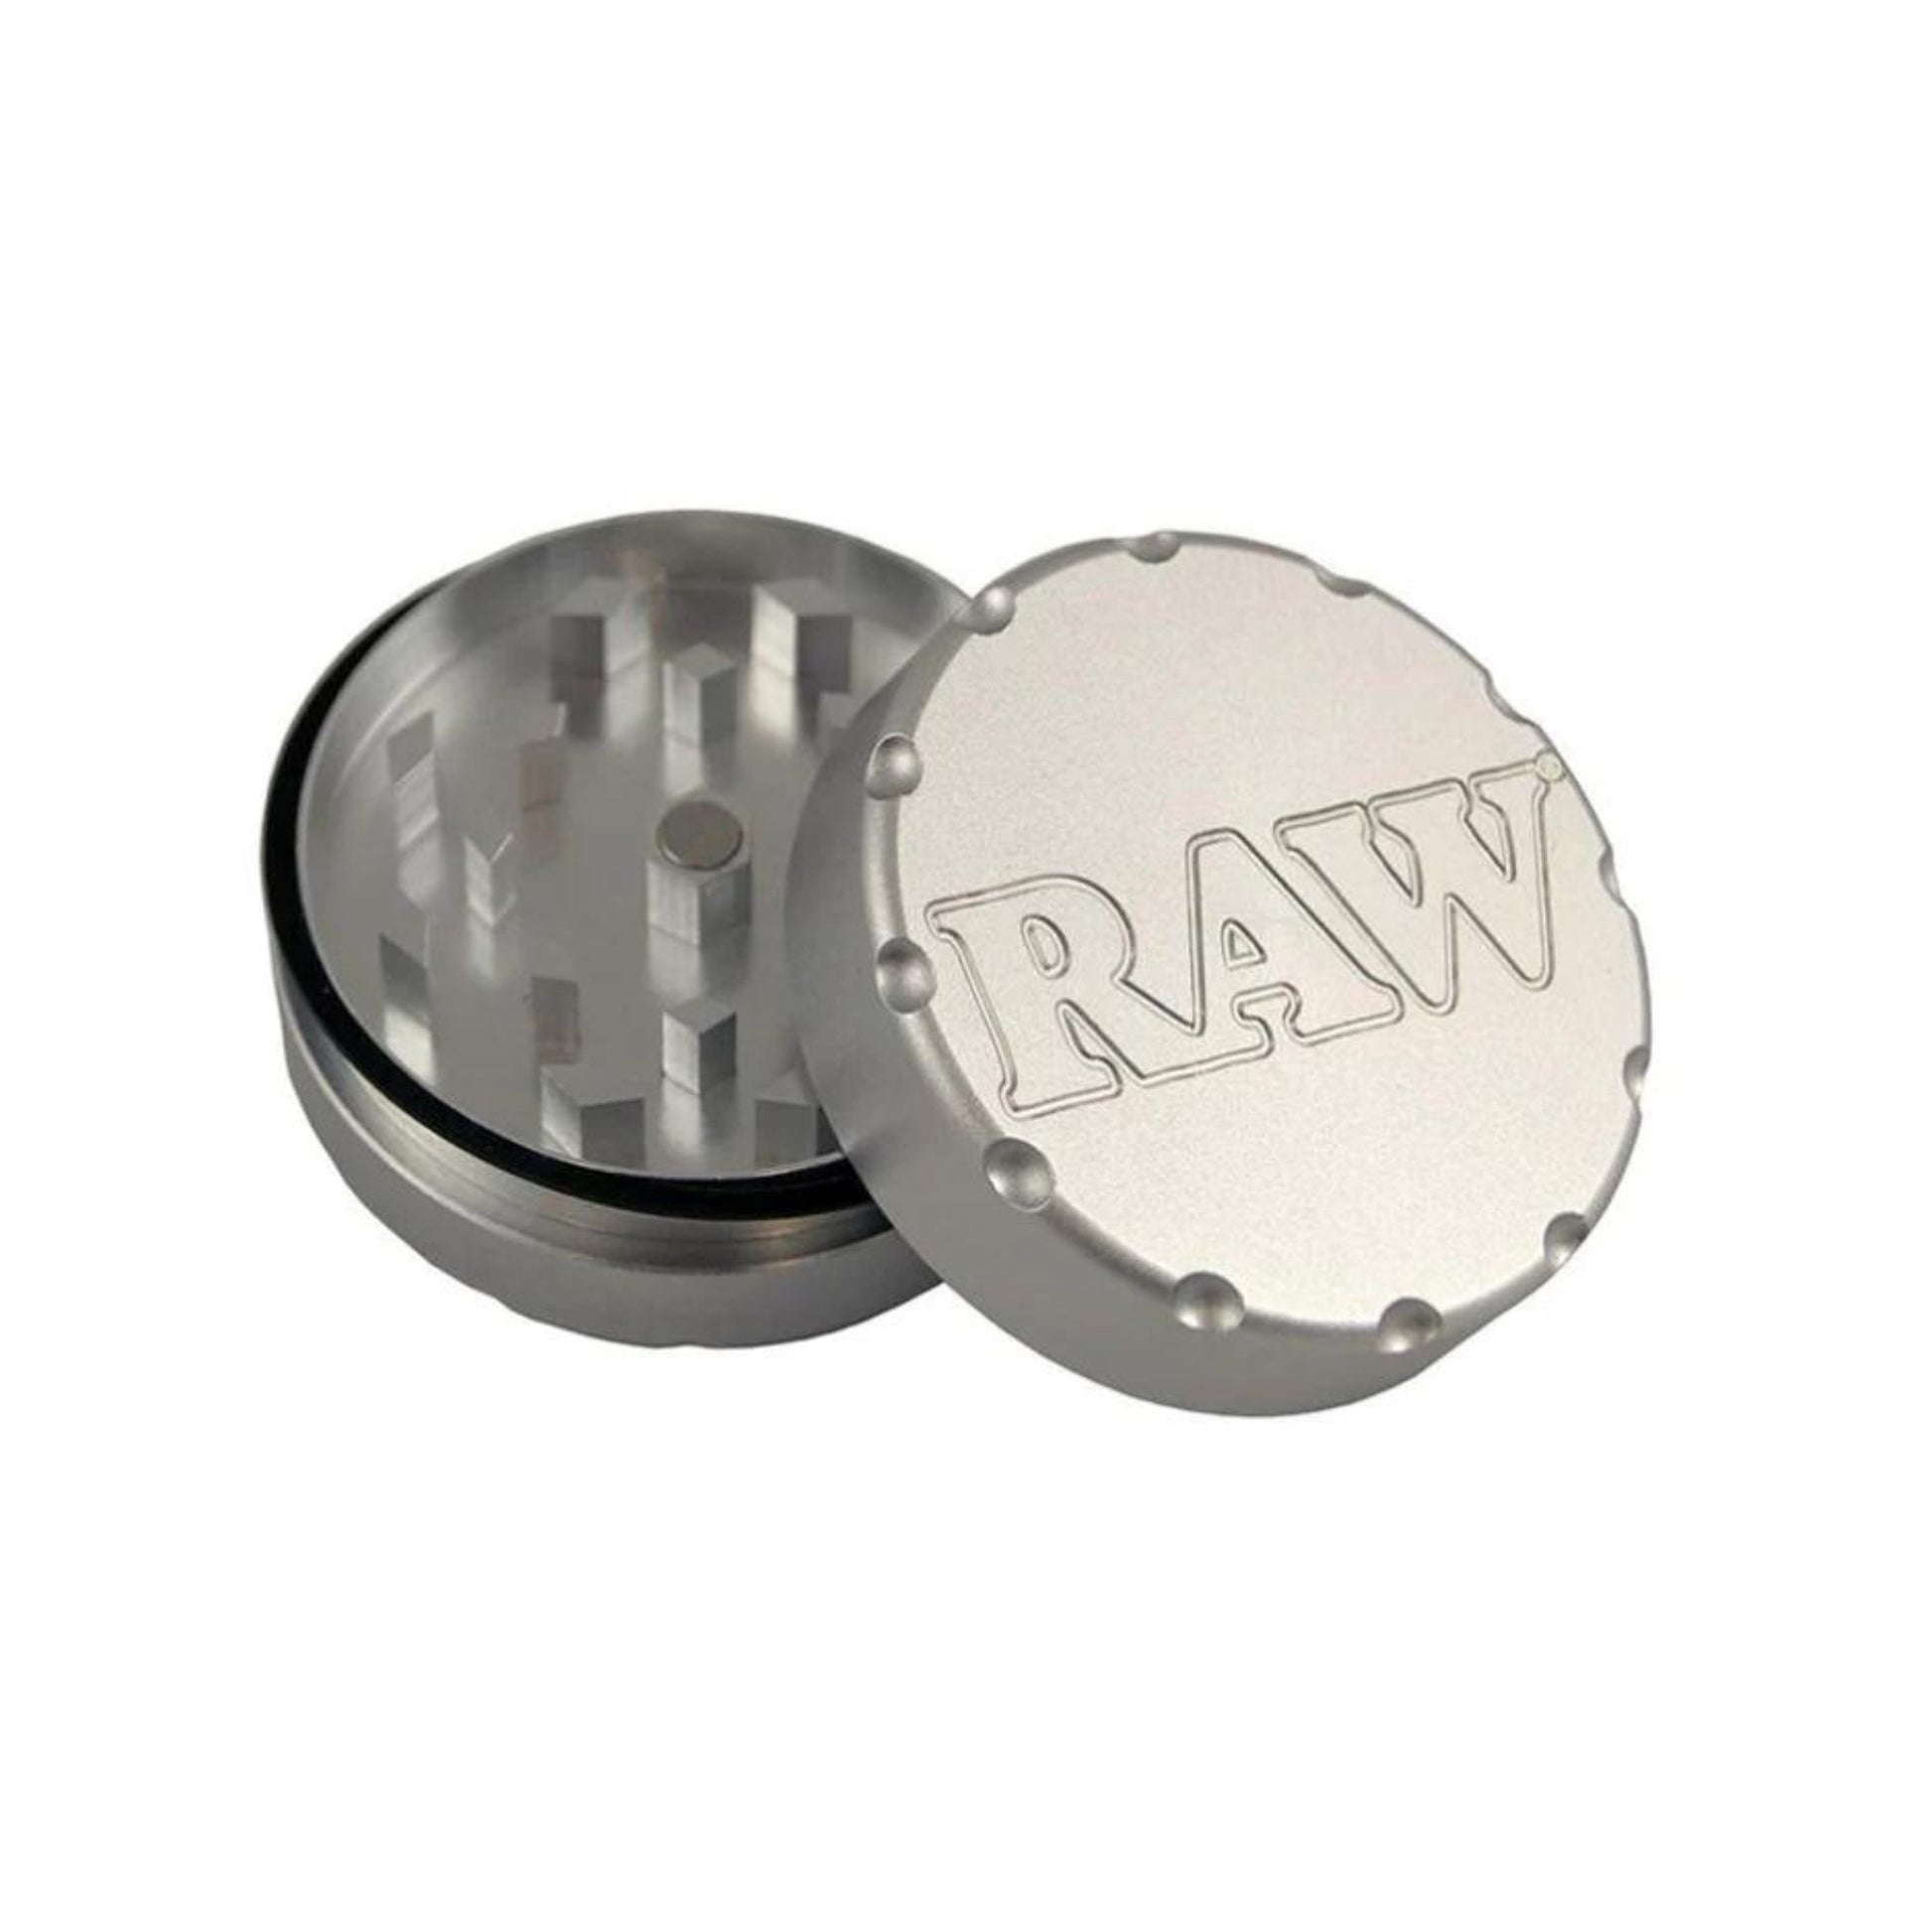 Buy RAW 2 Piece Classic Grinder Online In India at HighJack